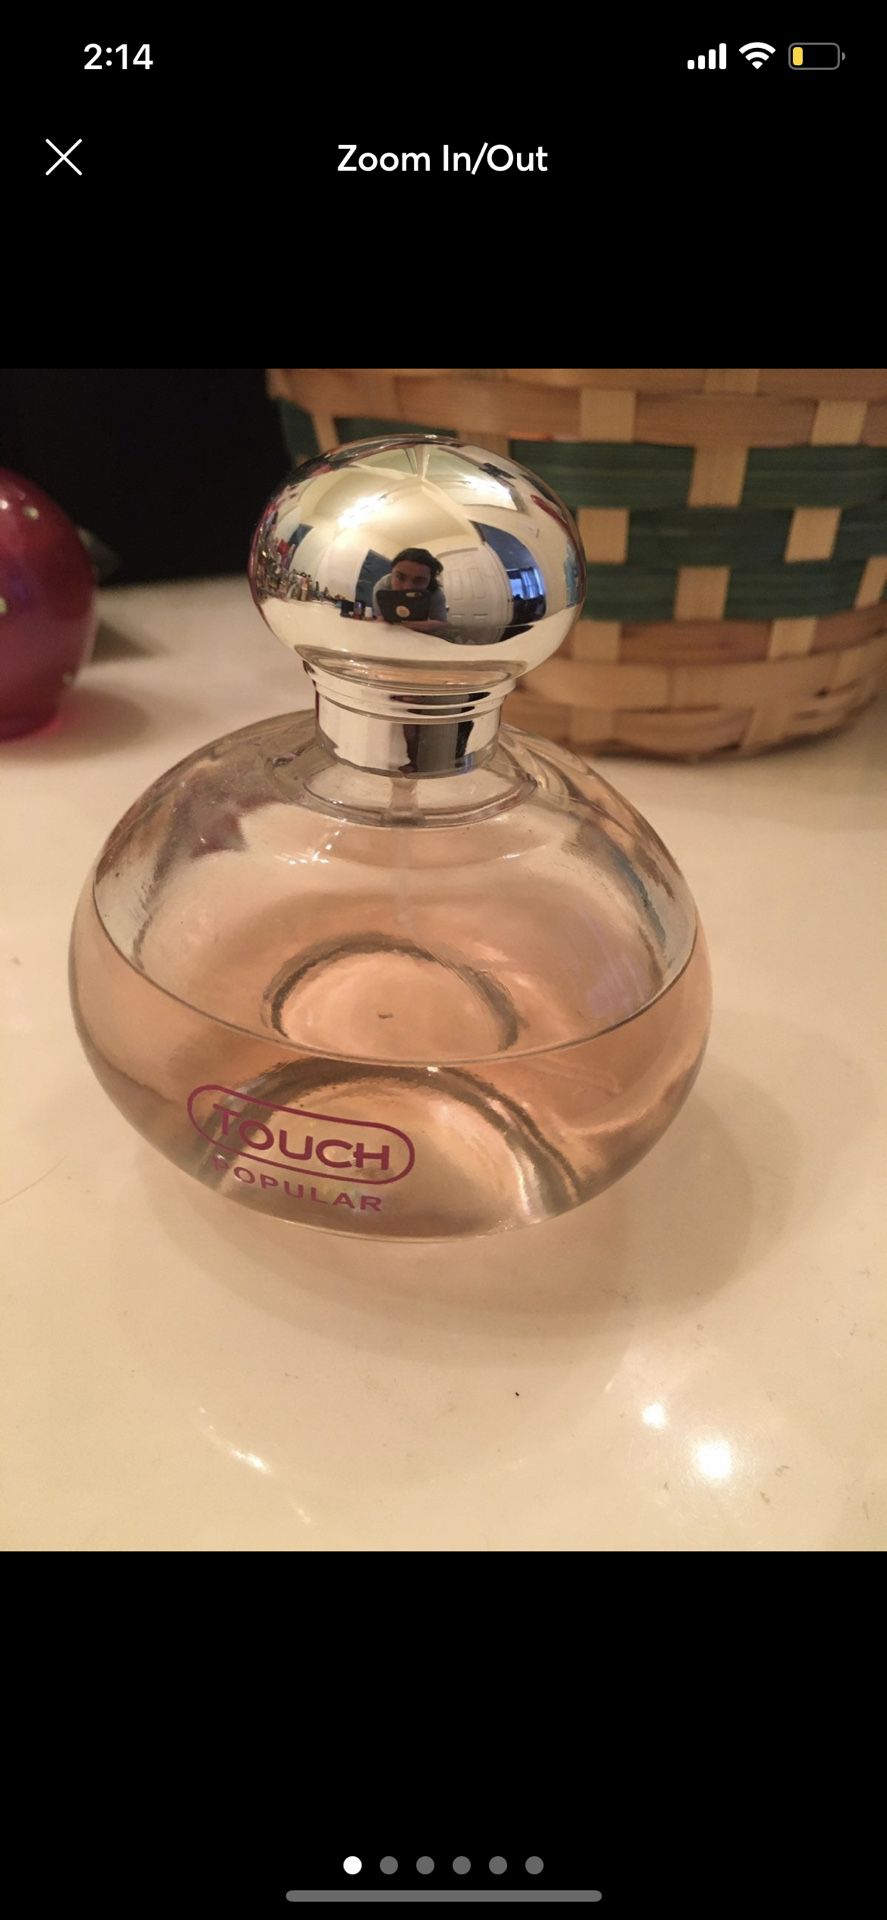 Vintage Perfume Lot Collection (Claiborne Chanel Hermes Madame Rochas  Paloma Joy) for Sale in Lake Forest, CA - OfferUp